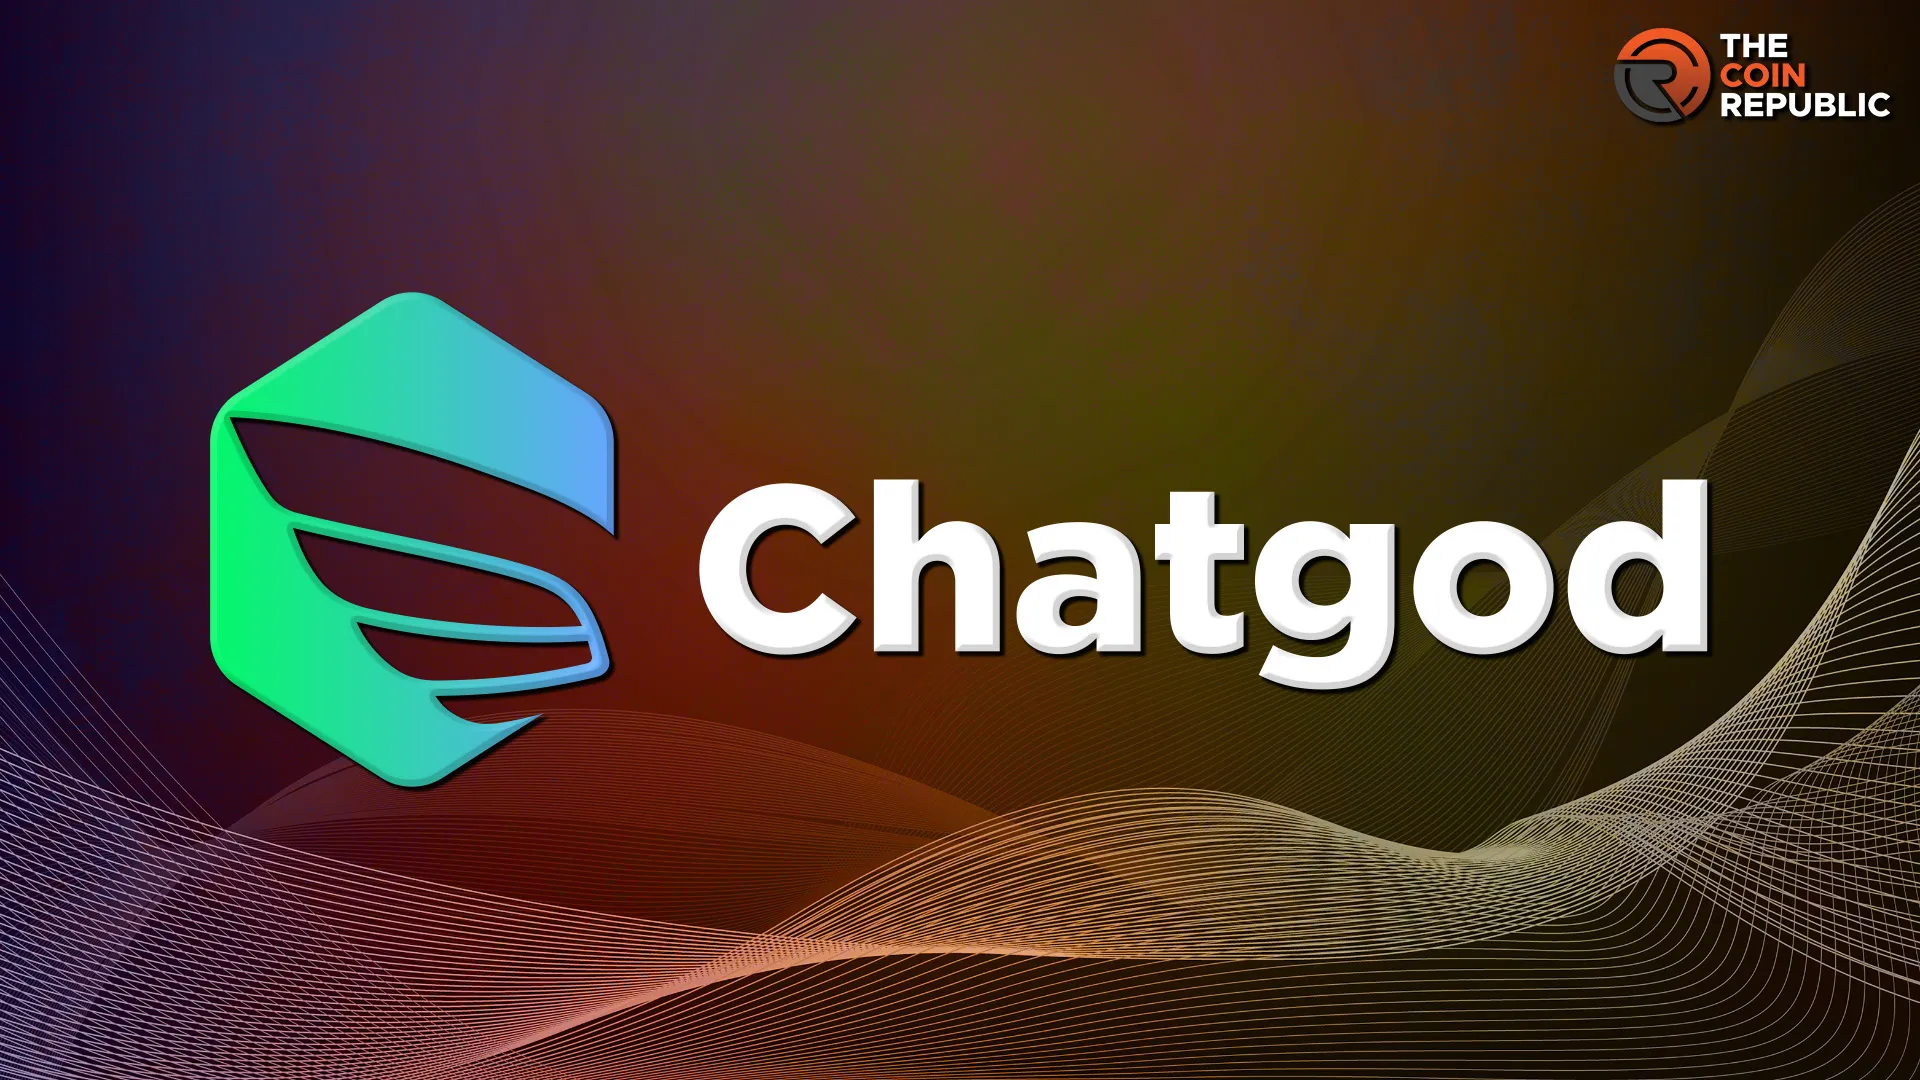 Is ChatGPD Different From Or Similar To ChatGPT? An Overview